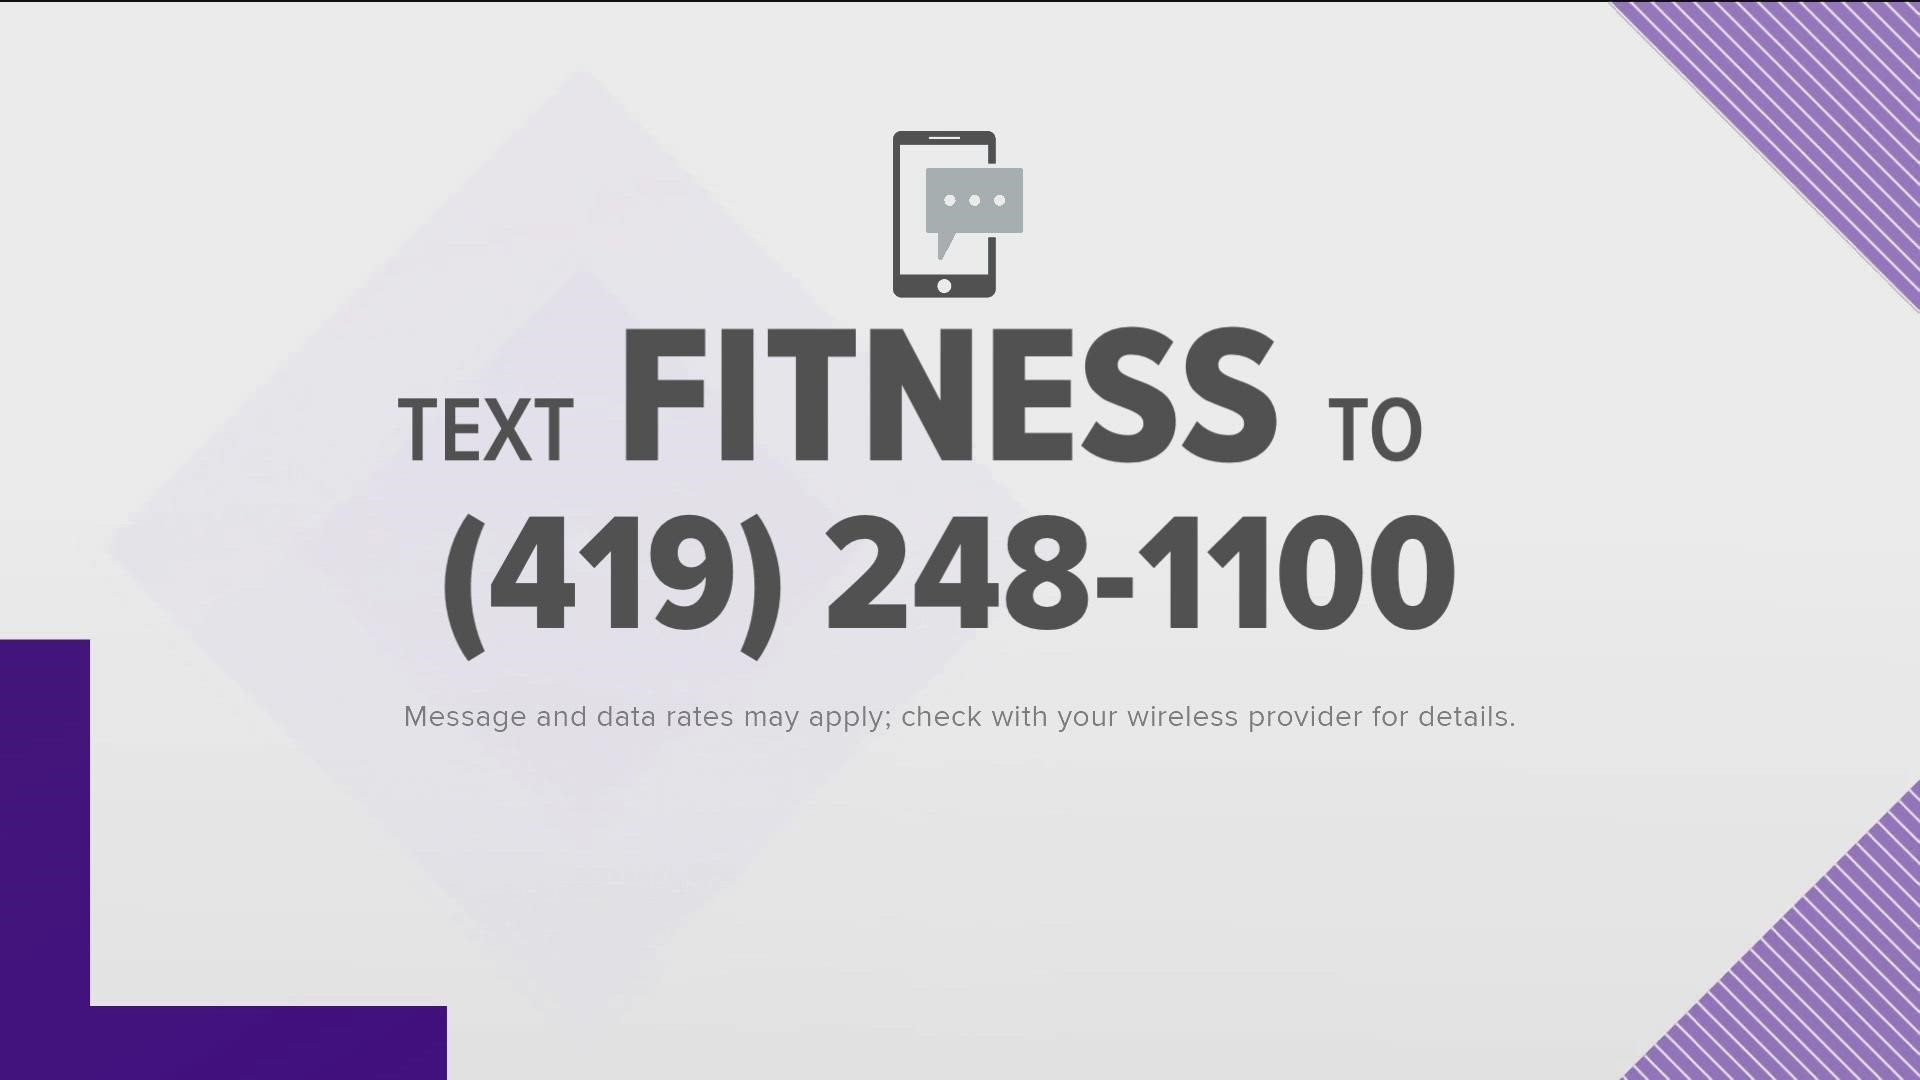 Sign up for this year's Super Fitness Weight Loss Challenge by texting the word FITNESS to 419-248-1100.